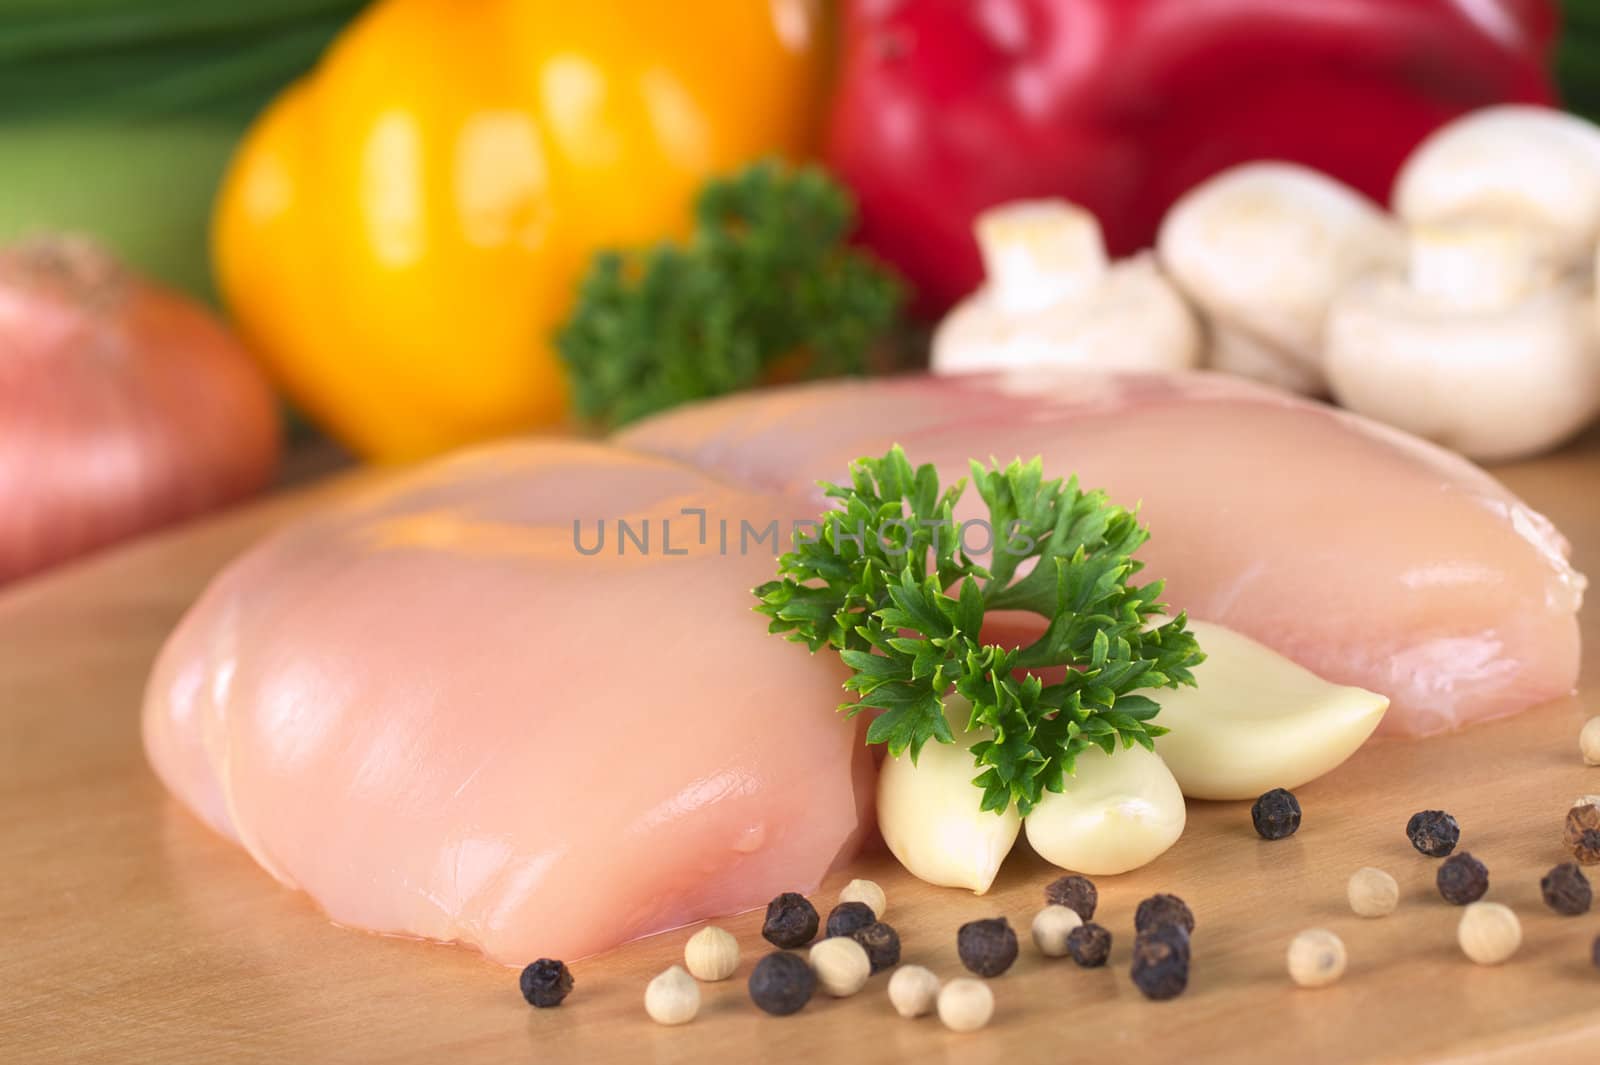 Raw chicken breast with white and black pepper corns, parsley leaf and garlic and with some fresh vegetable in the back (Selective Focus, Focus on the front of the meat and the parsley)